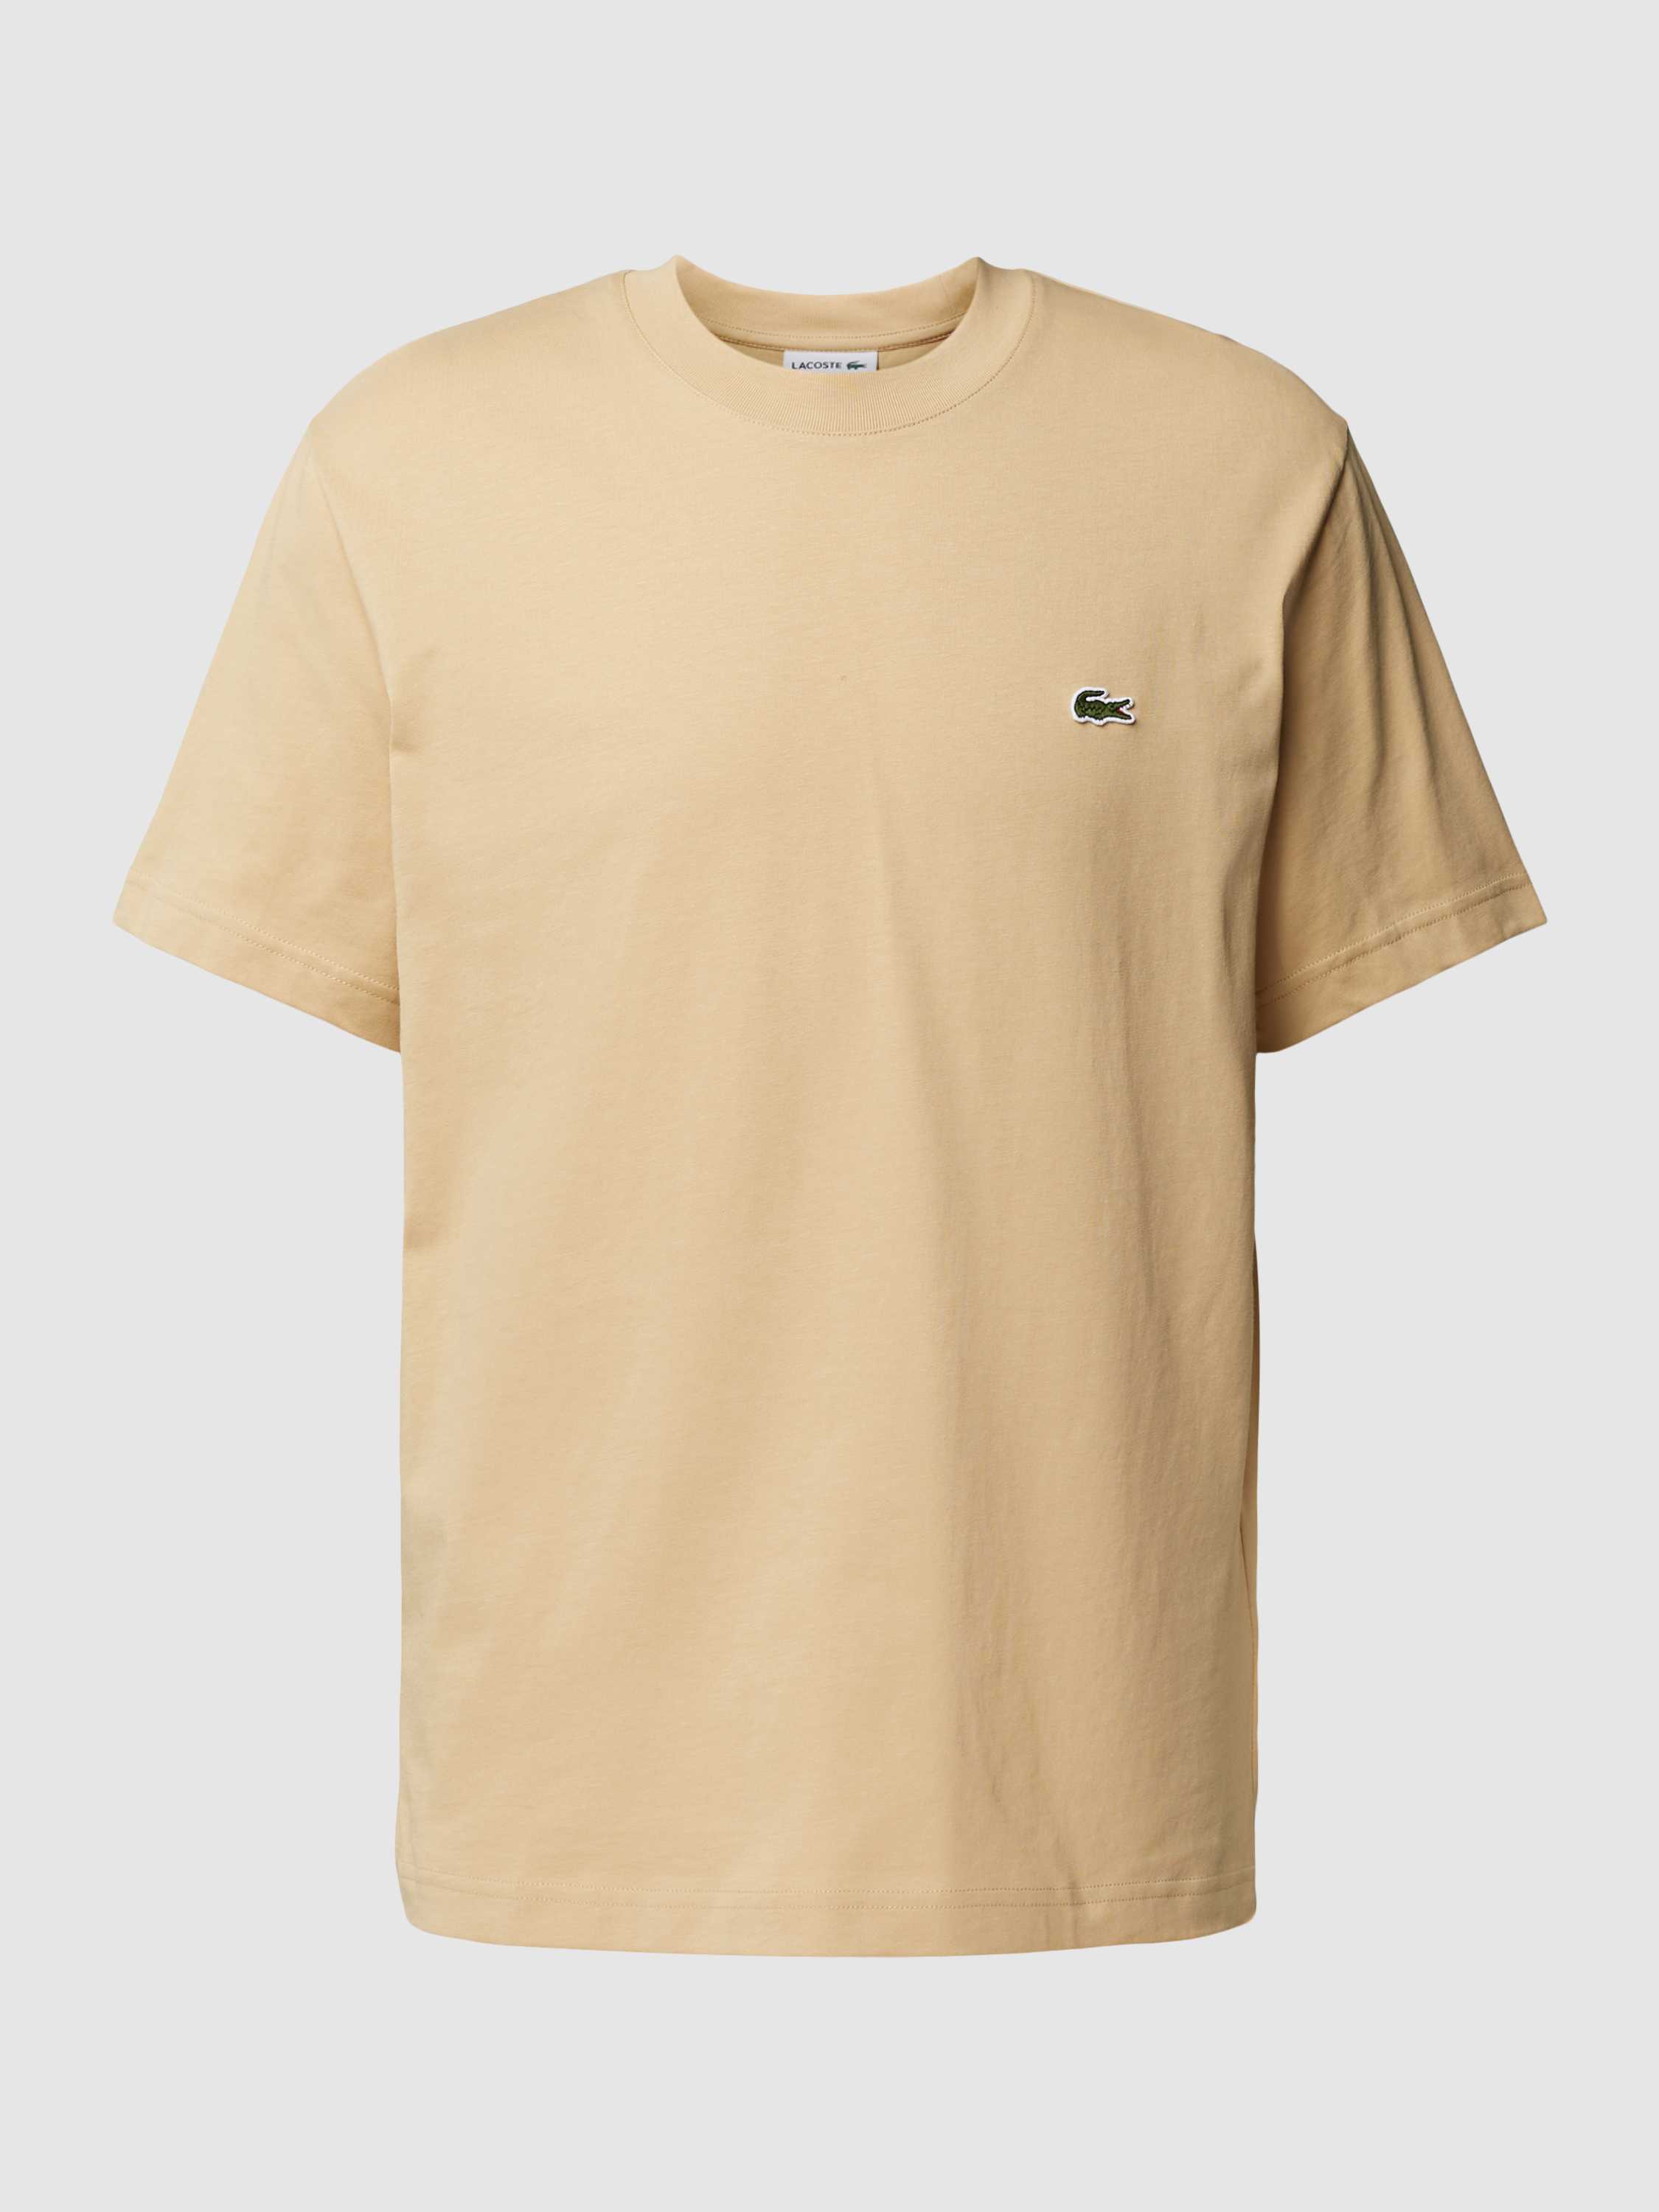 Lacoste  T-Shirt TH7318